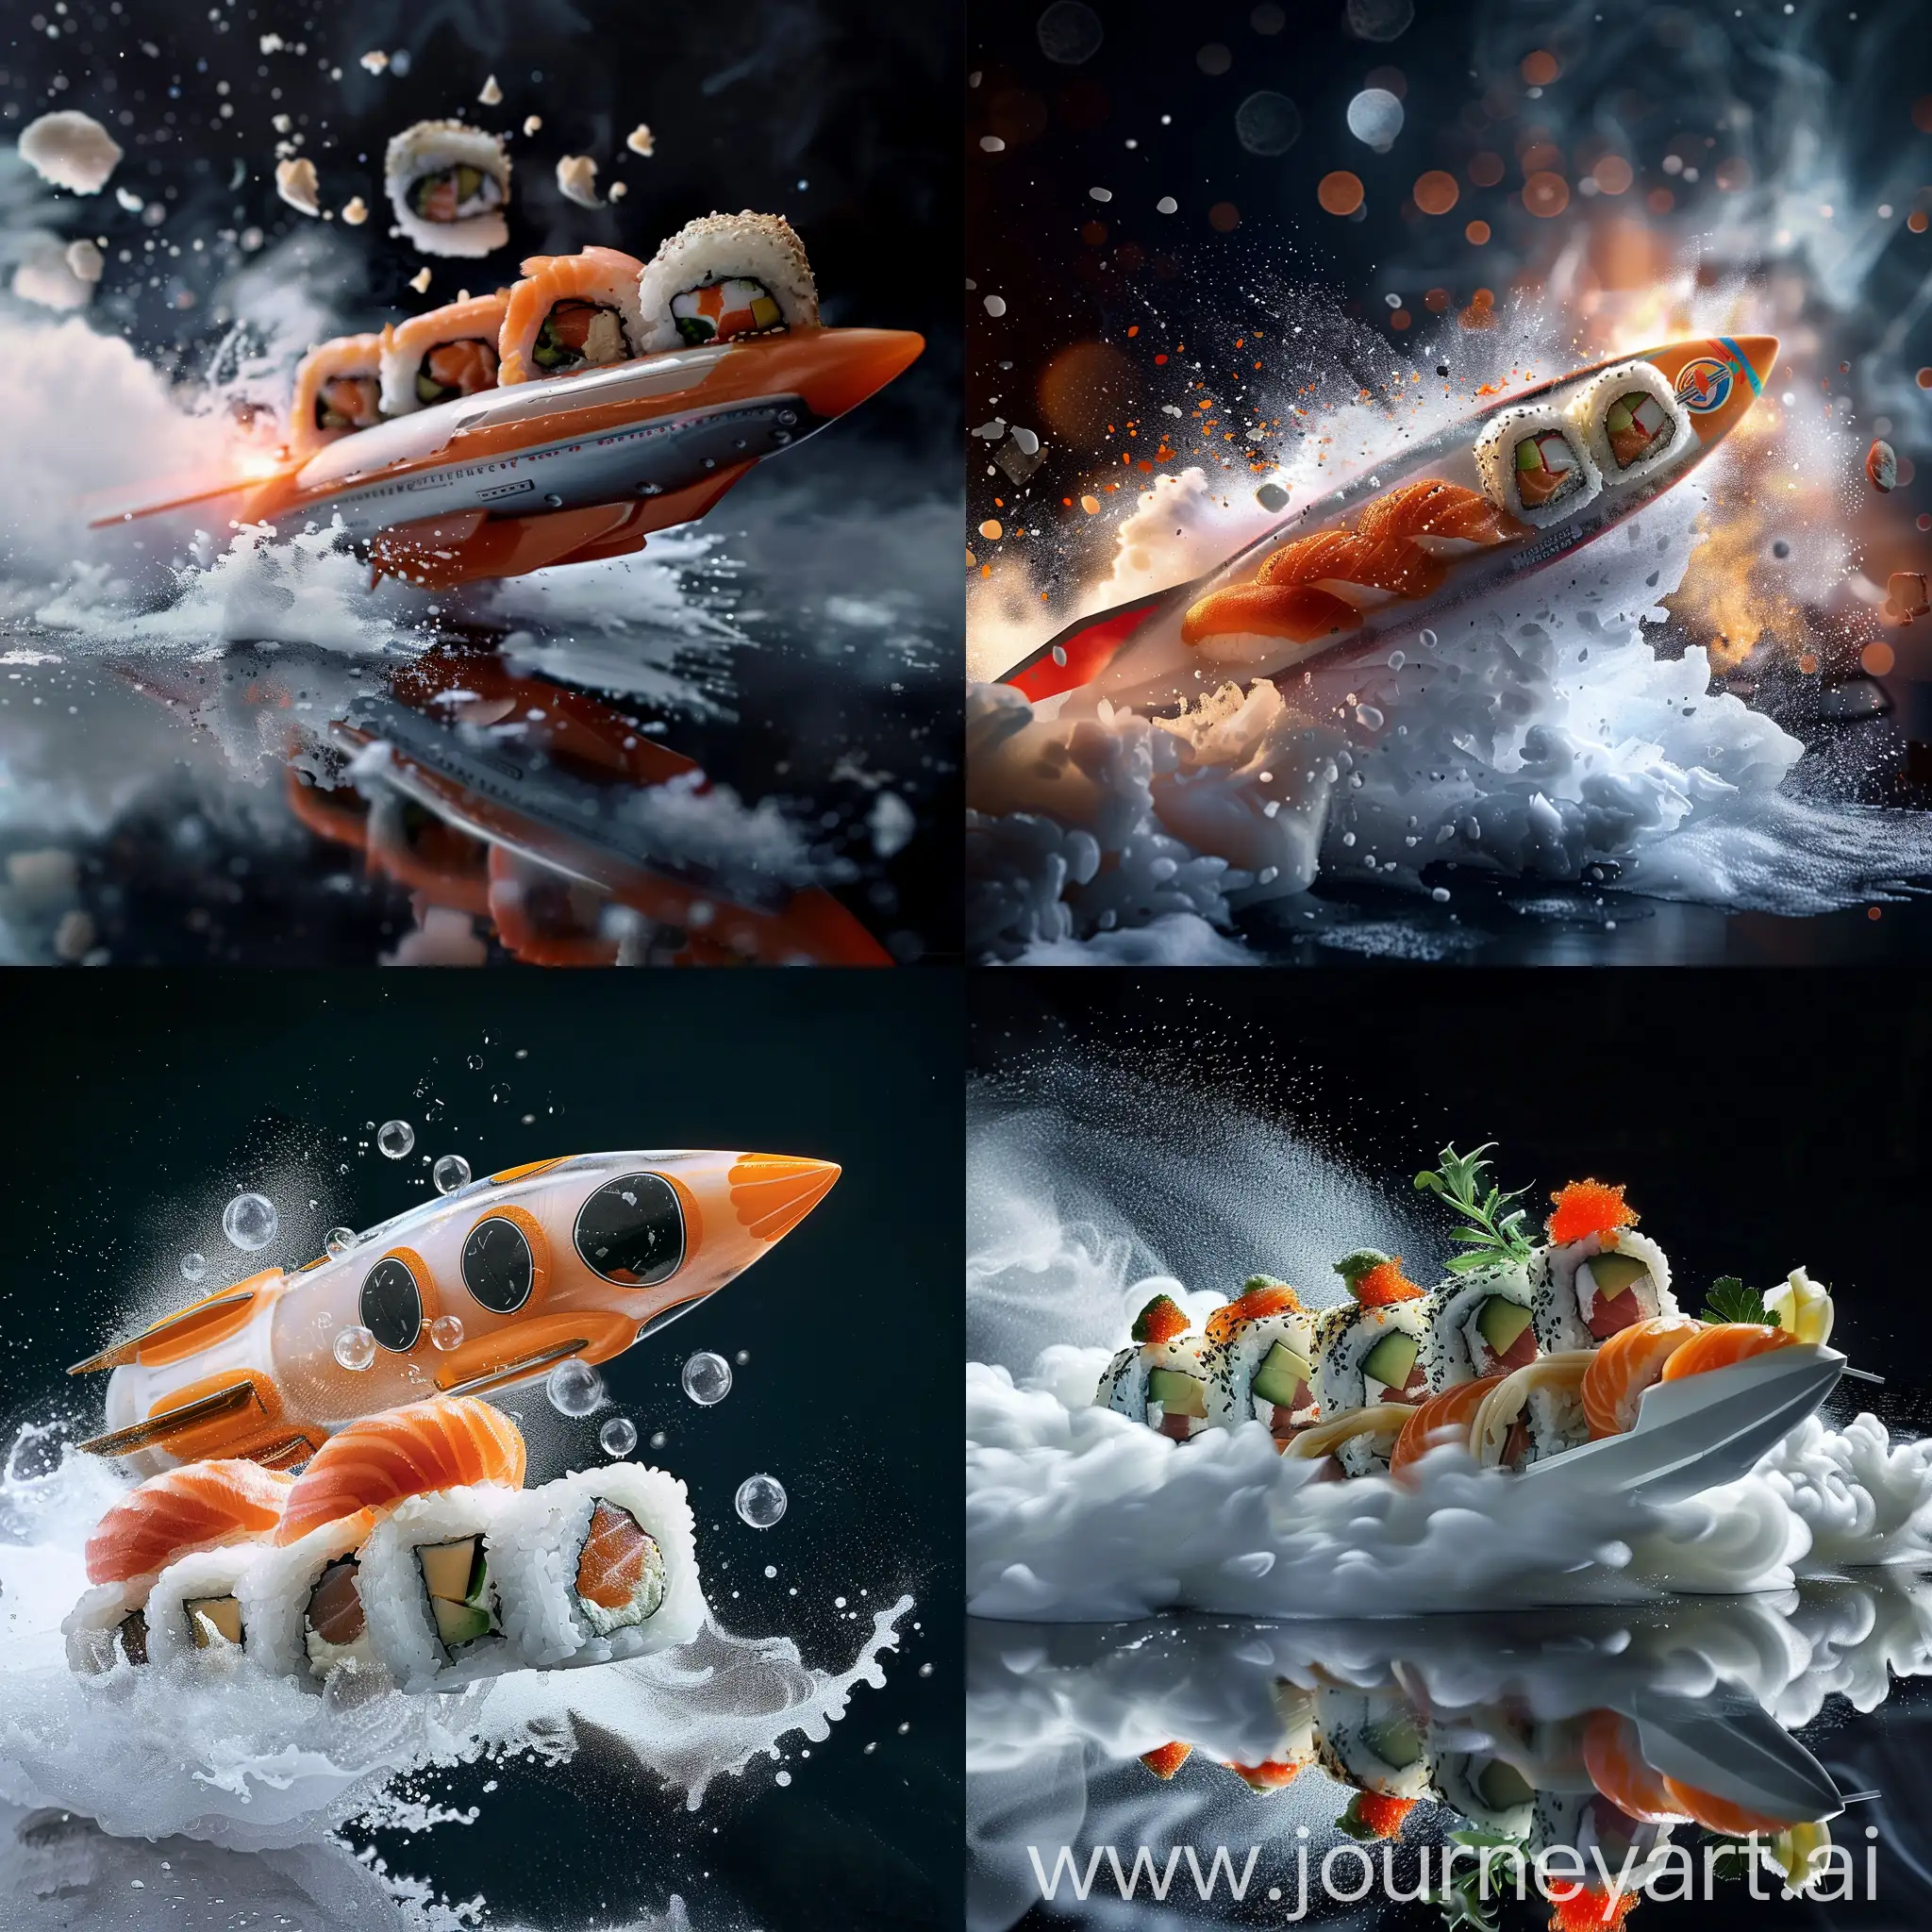 Depict sushi transformed into a spaceship rushing towards the customer at high speed.